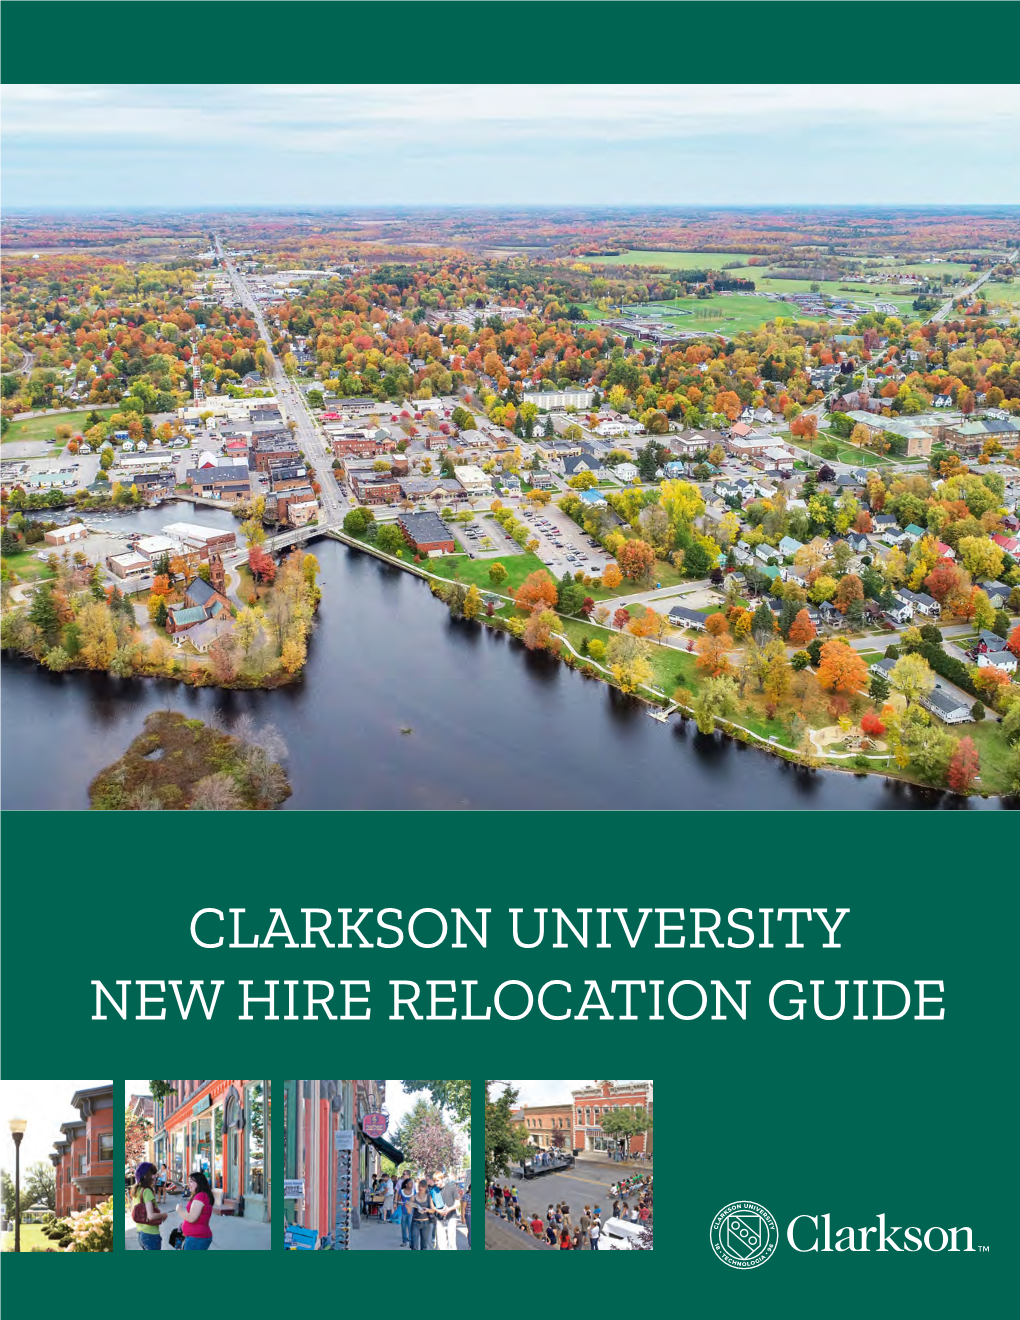 Clarkson University New Hire Relocation Guide Welcome to Clarkson University!